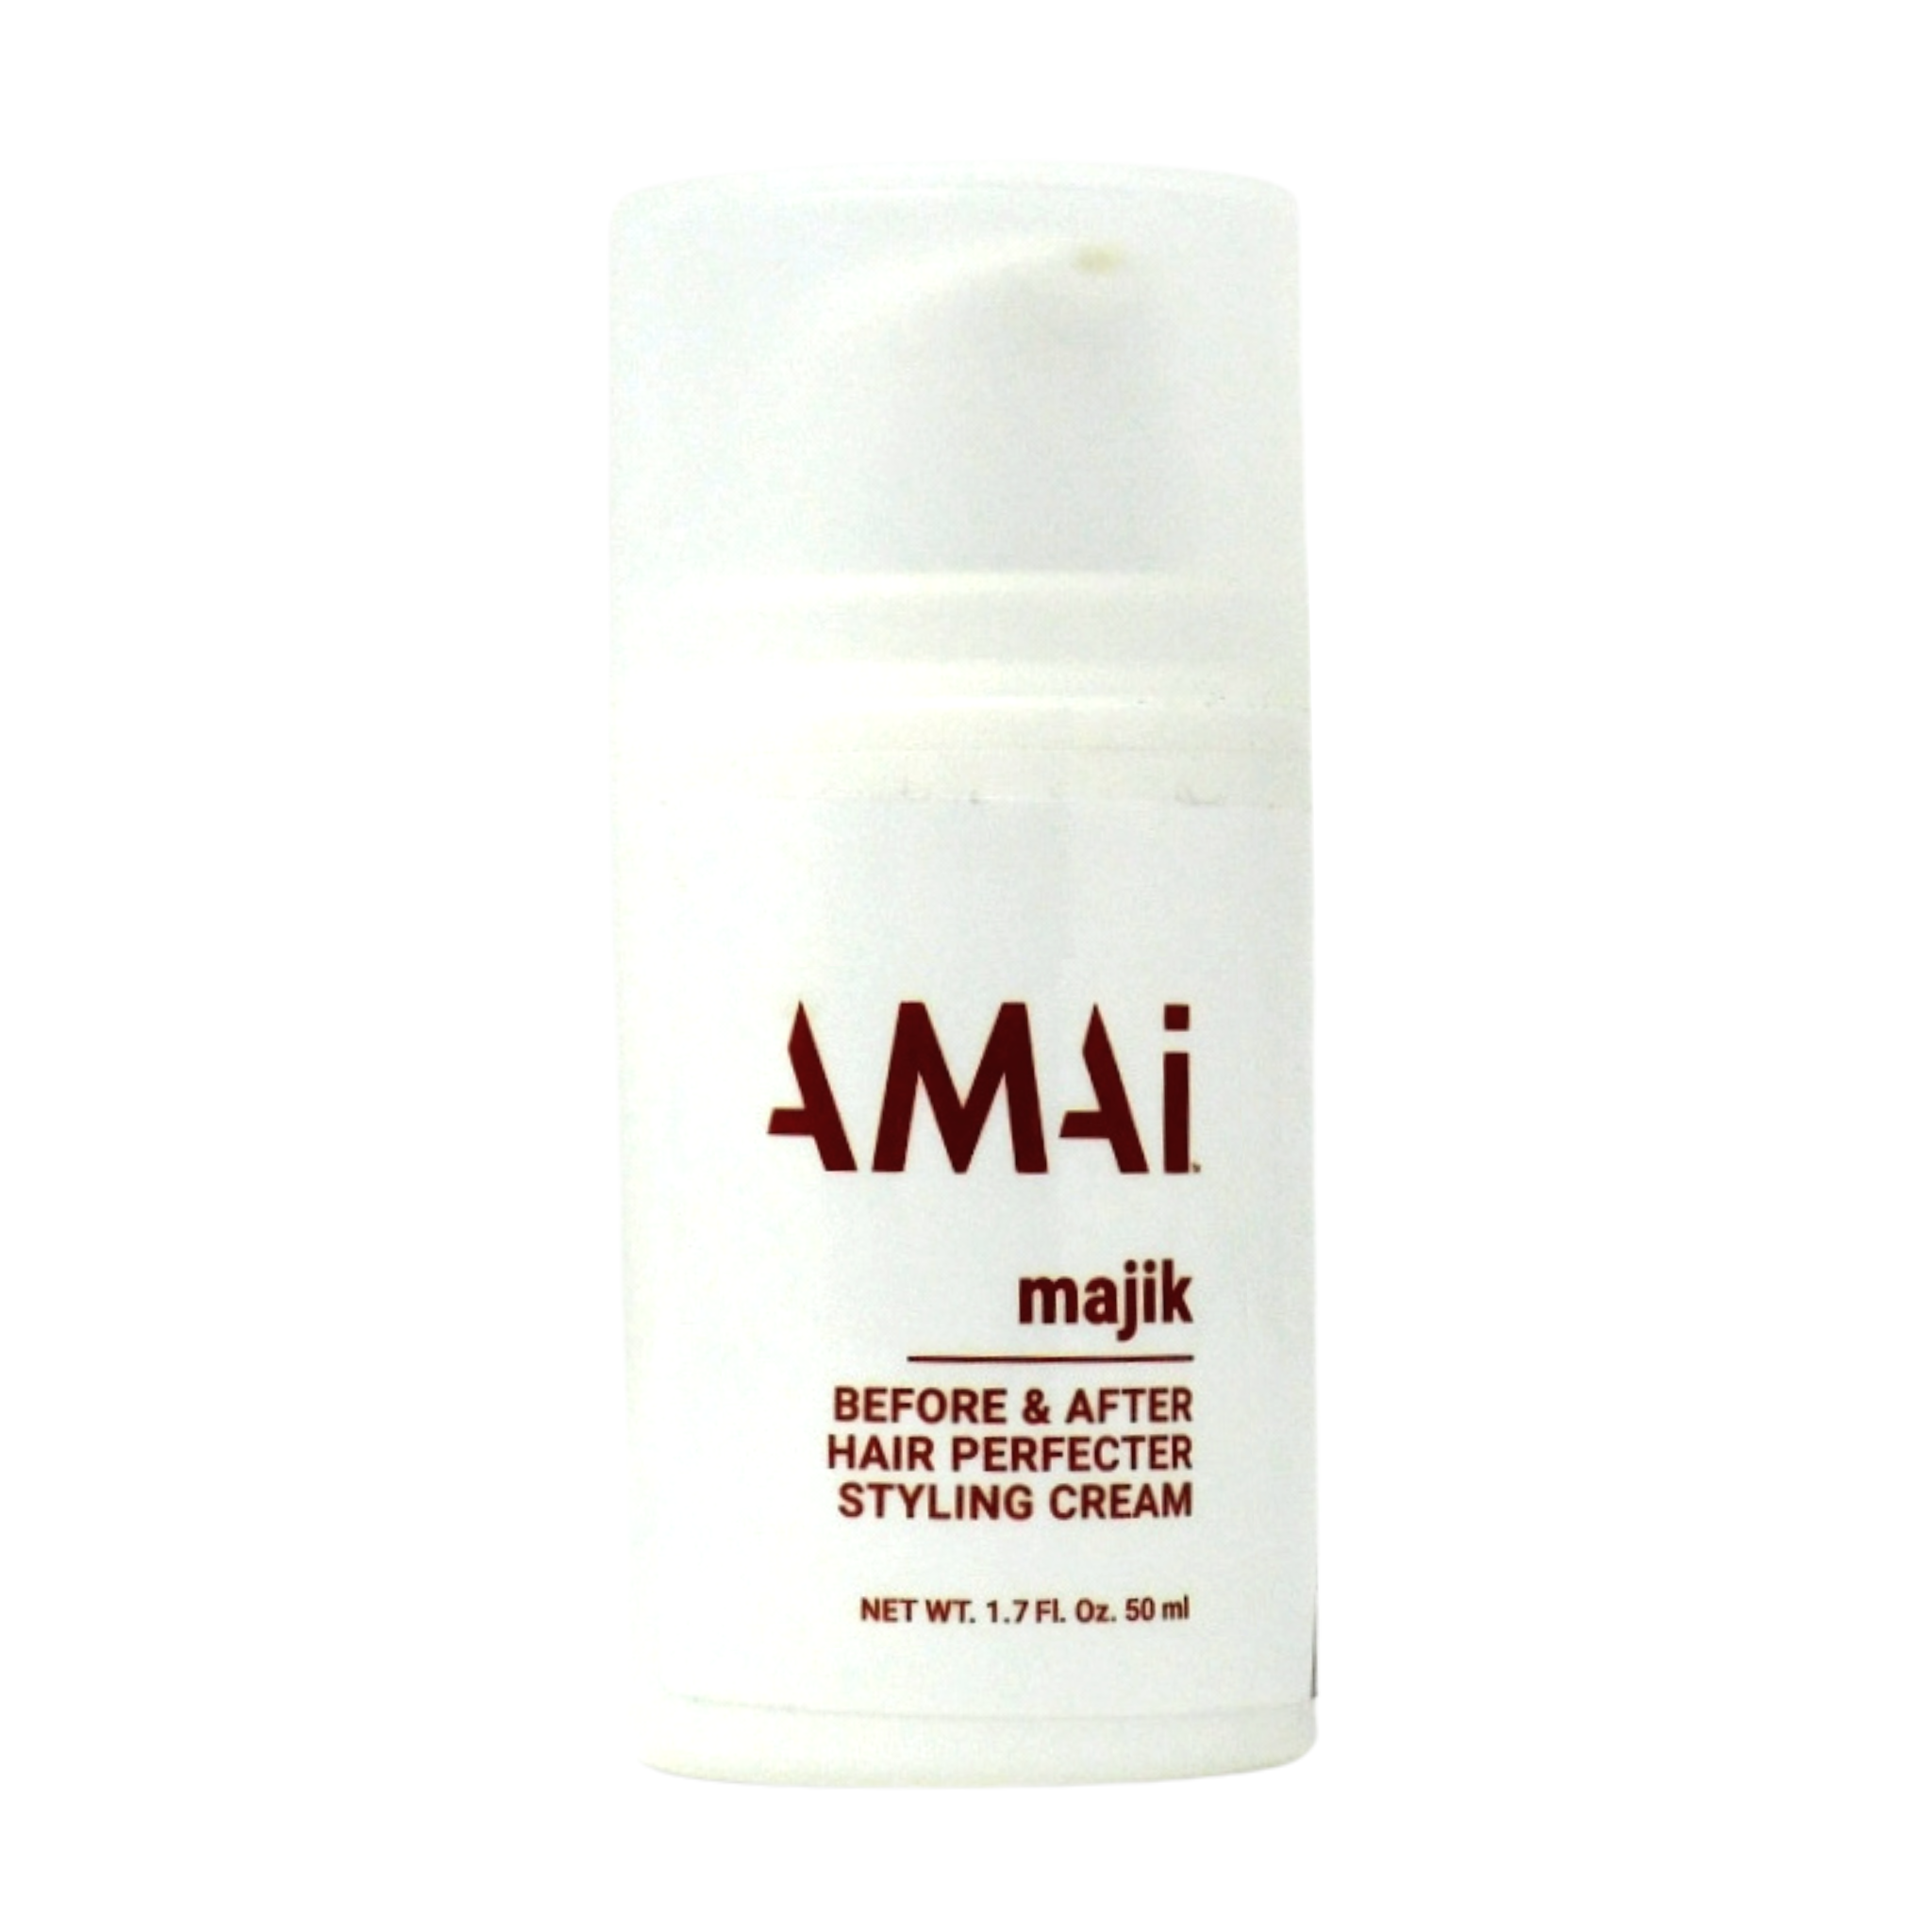 Majik Before  After Hair Perfecter Styling Cream! Size: 1.7 Fl. Oz – AMAI  Beauty